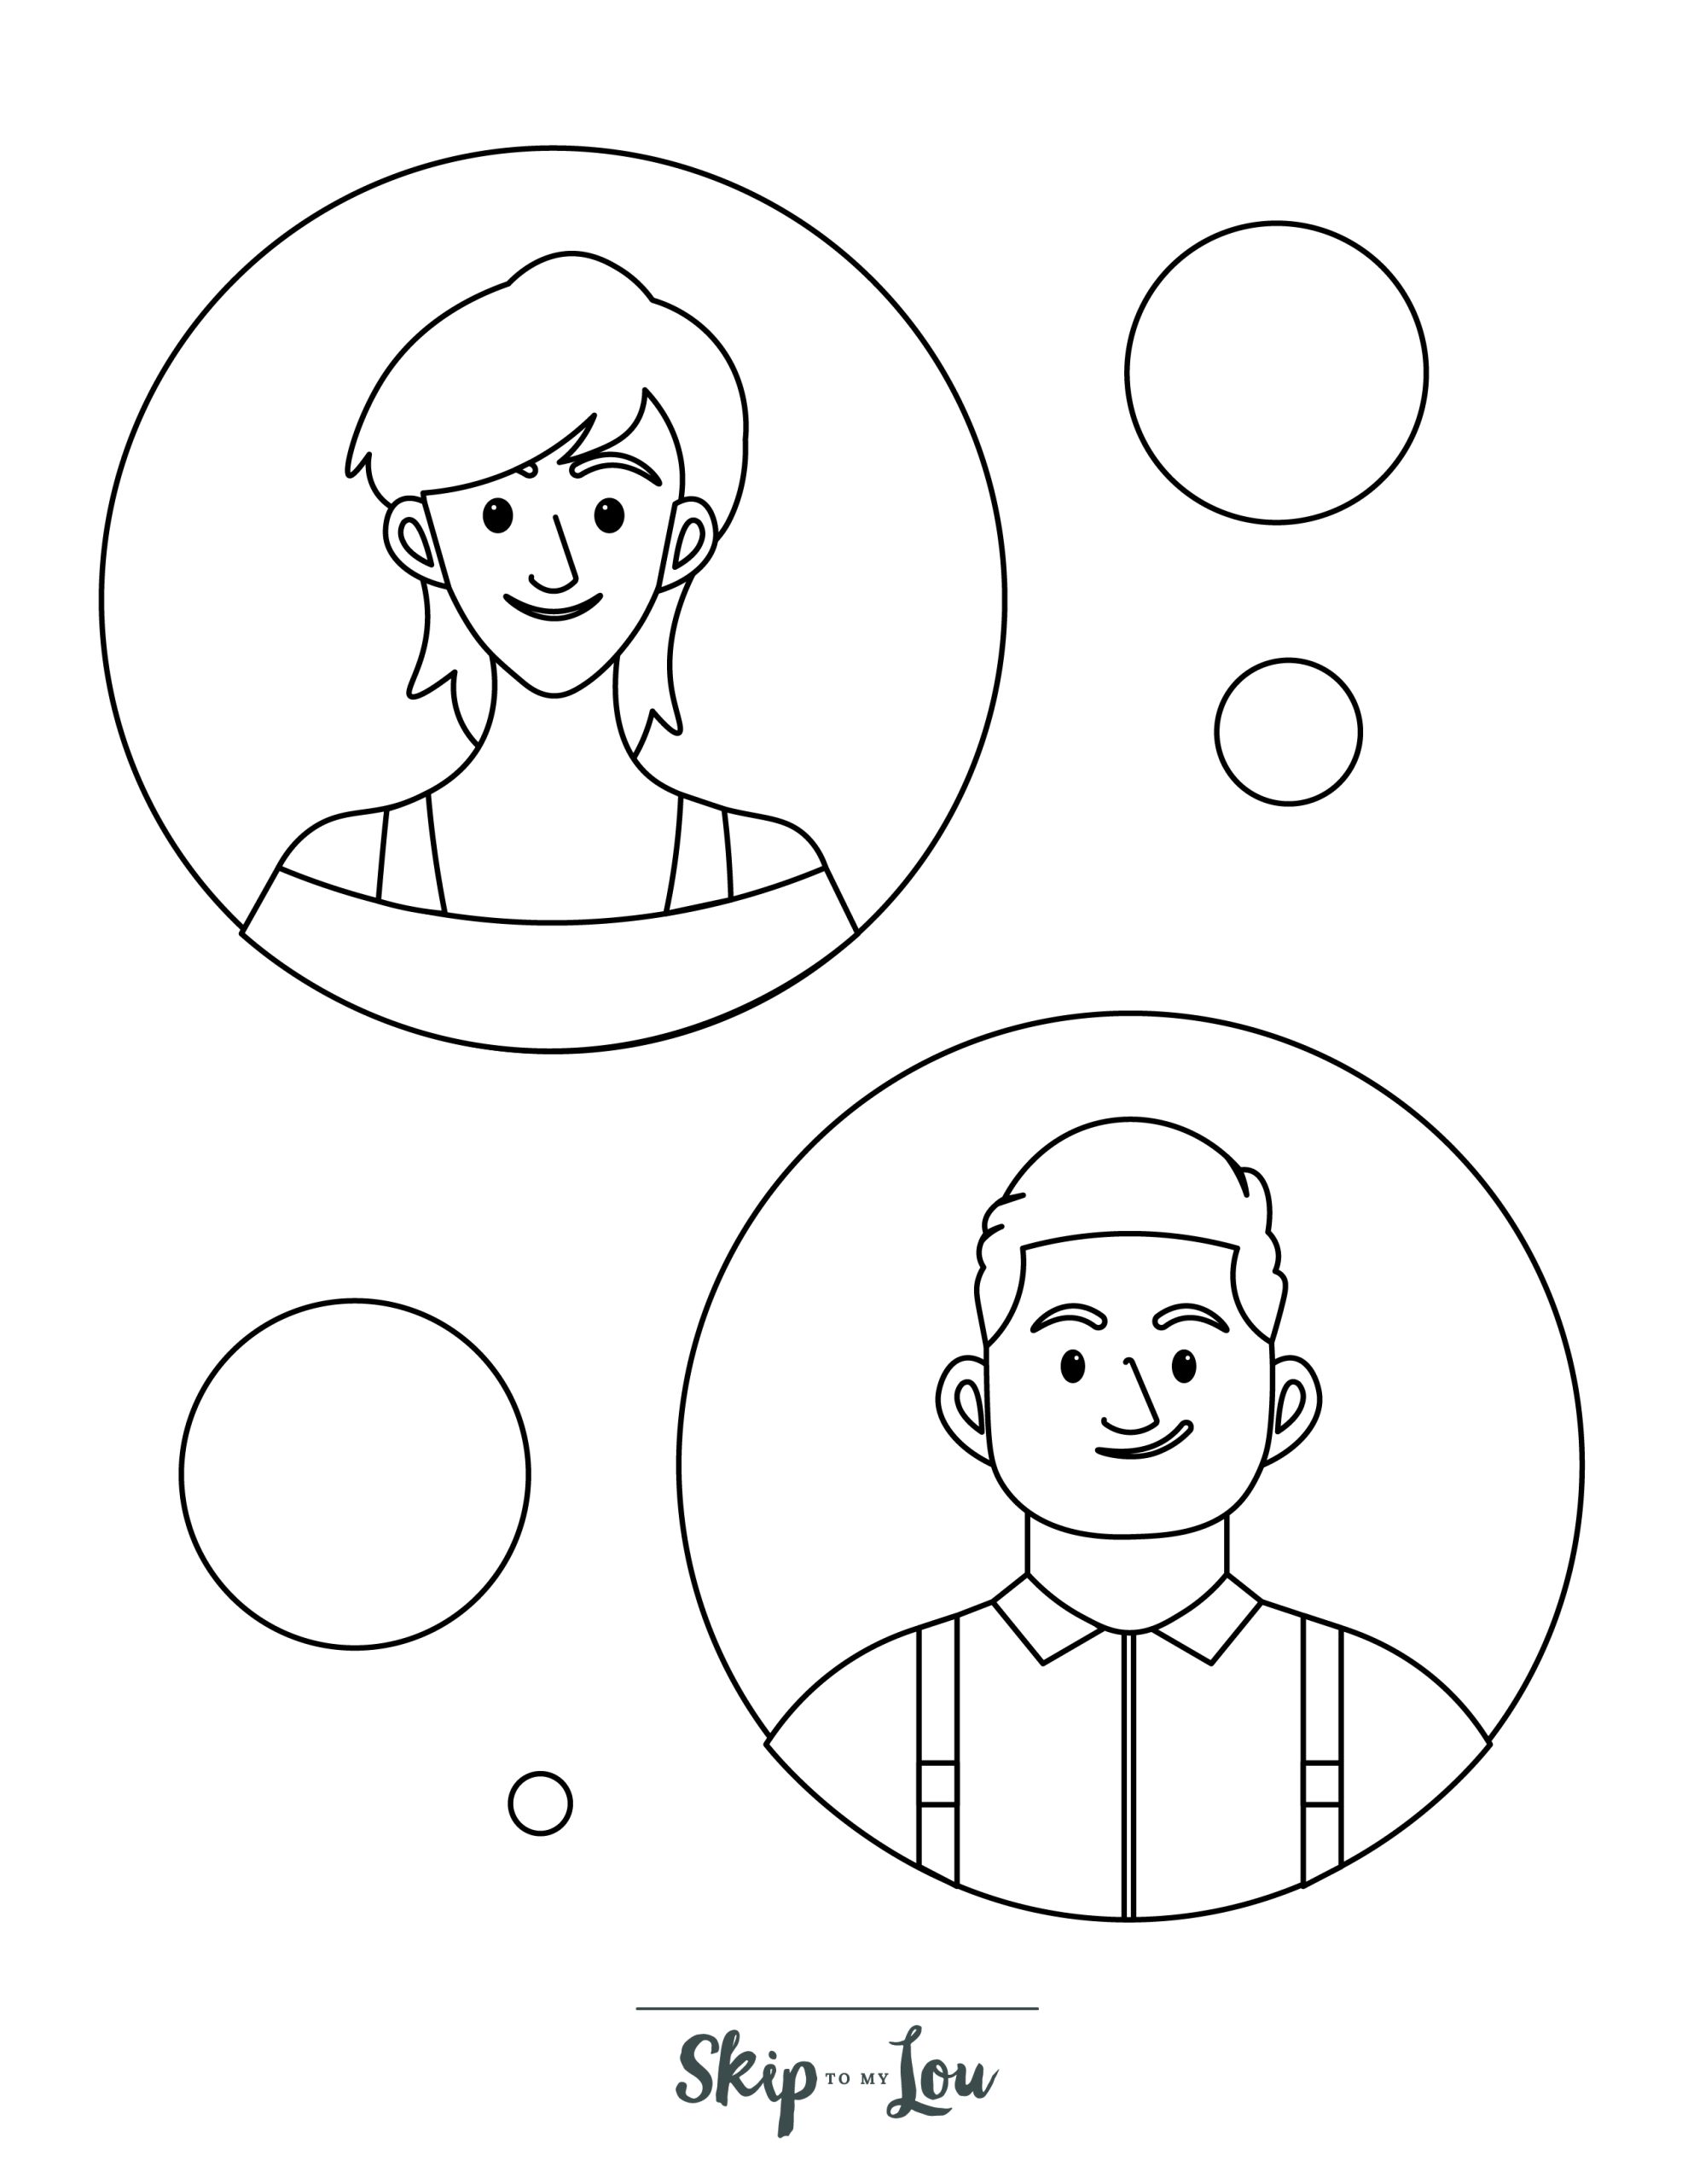 People Coloring Page 3 - Line drawing of happy people in bubbles